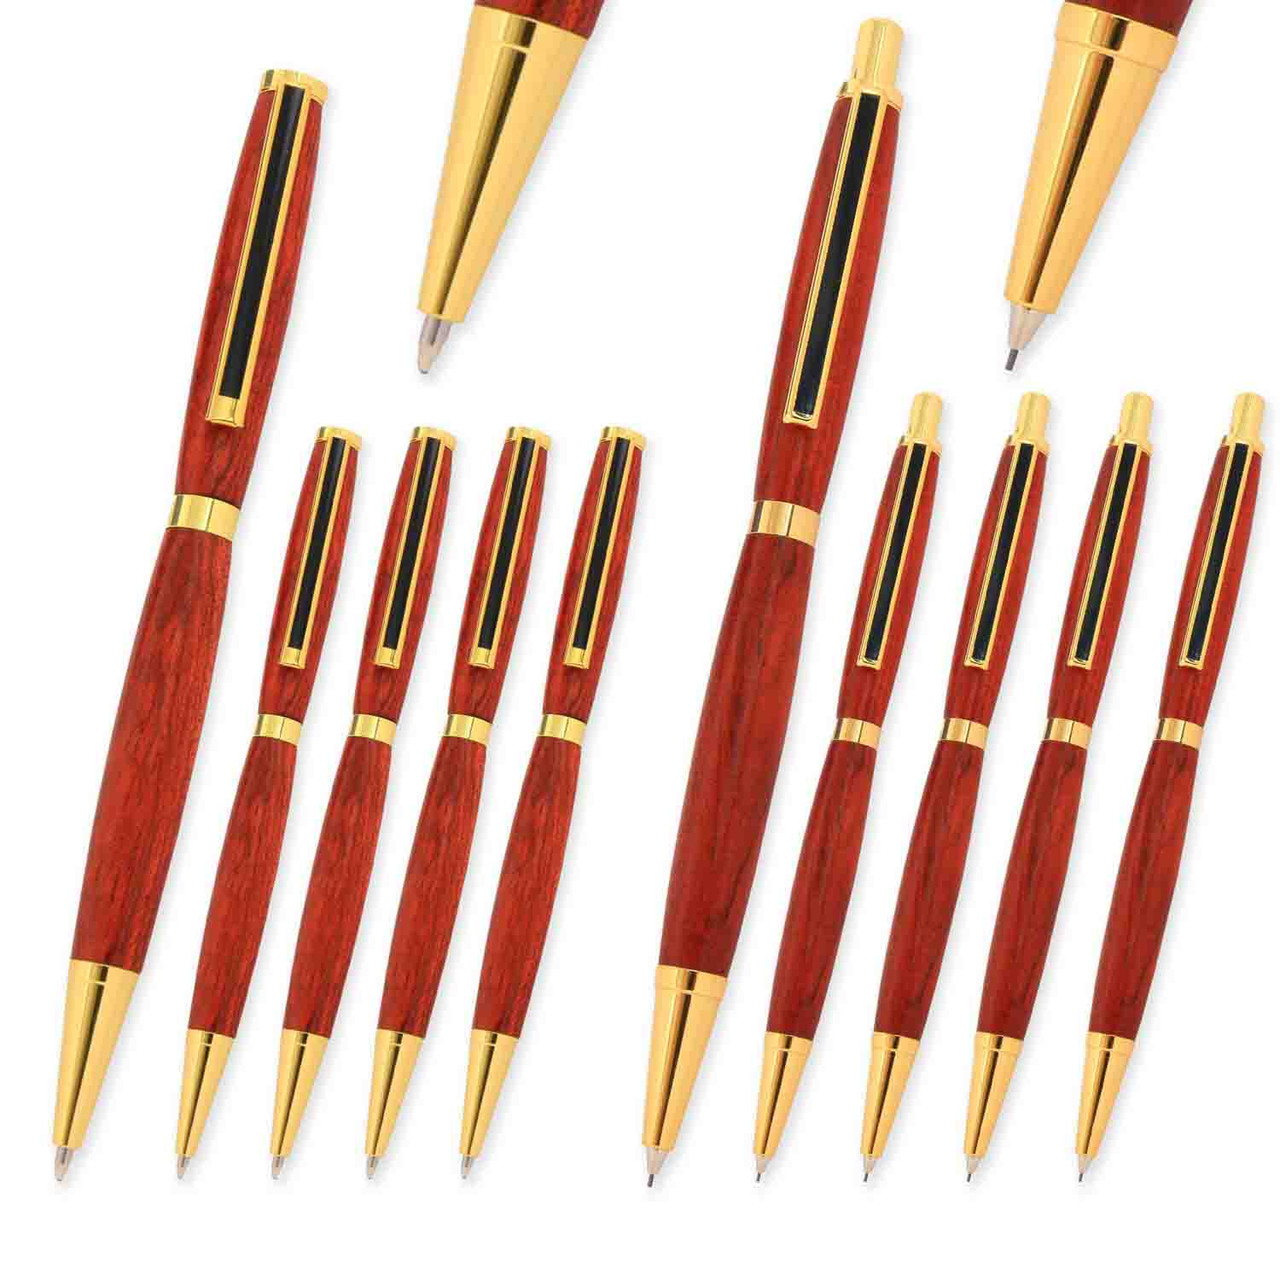 Legacy, Slimline Pen and Pencil Kit Combo Set, Gold with Black Striped Clip, 10 Pack